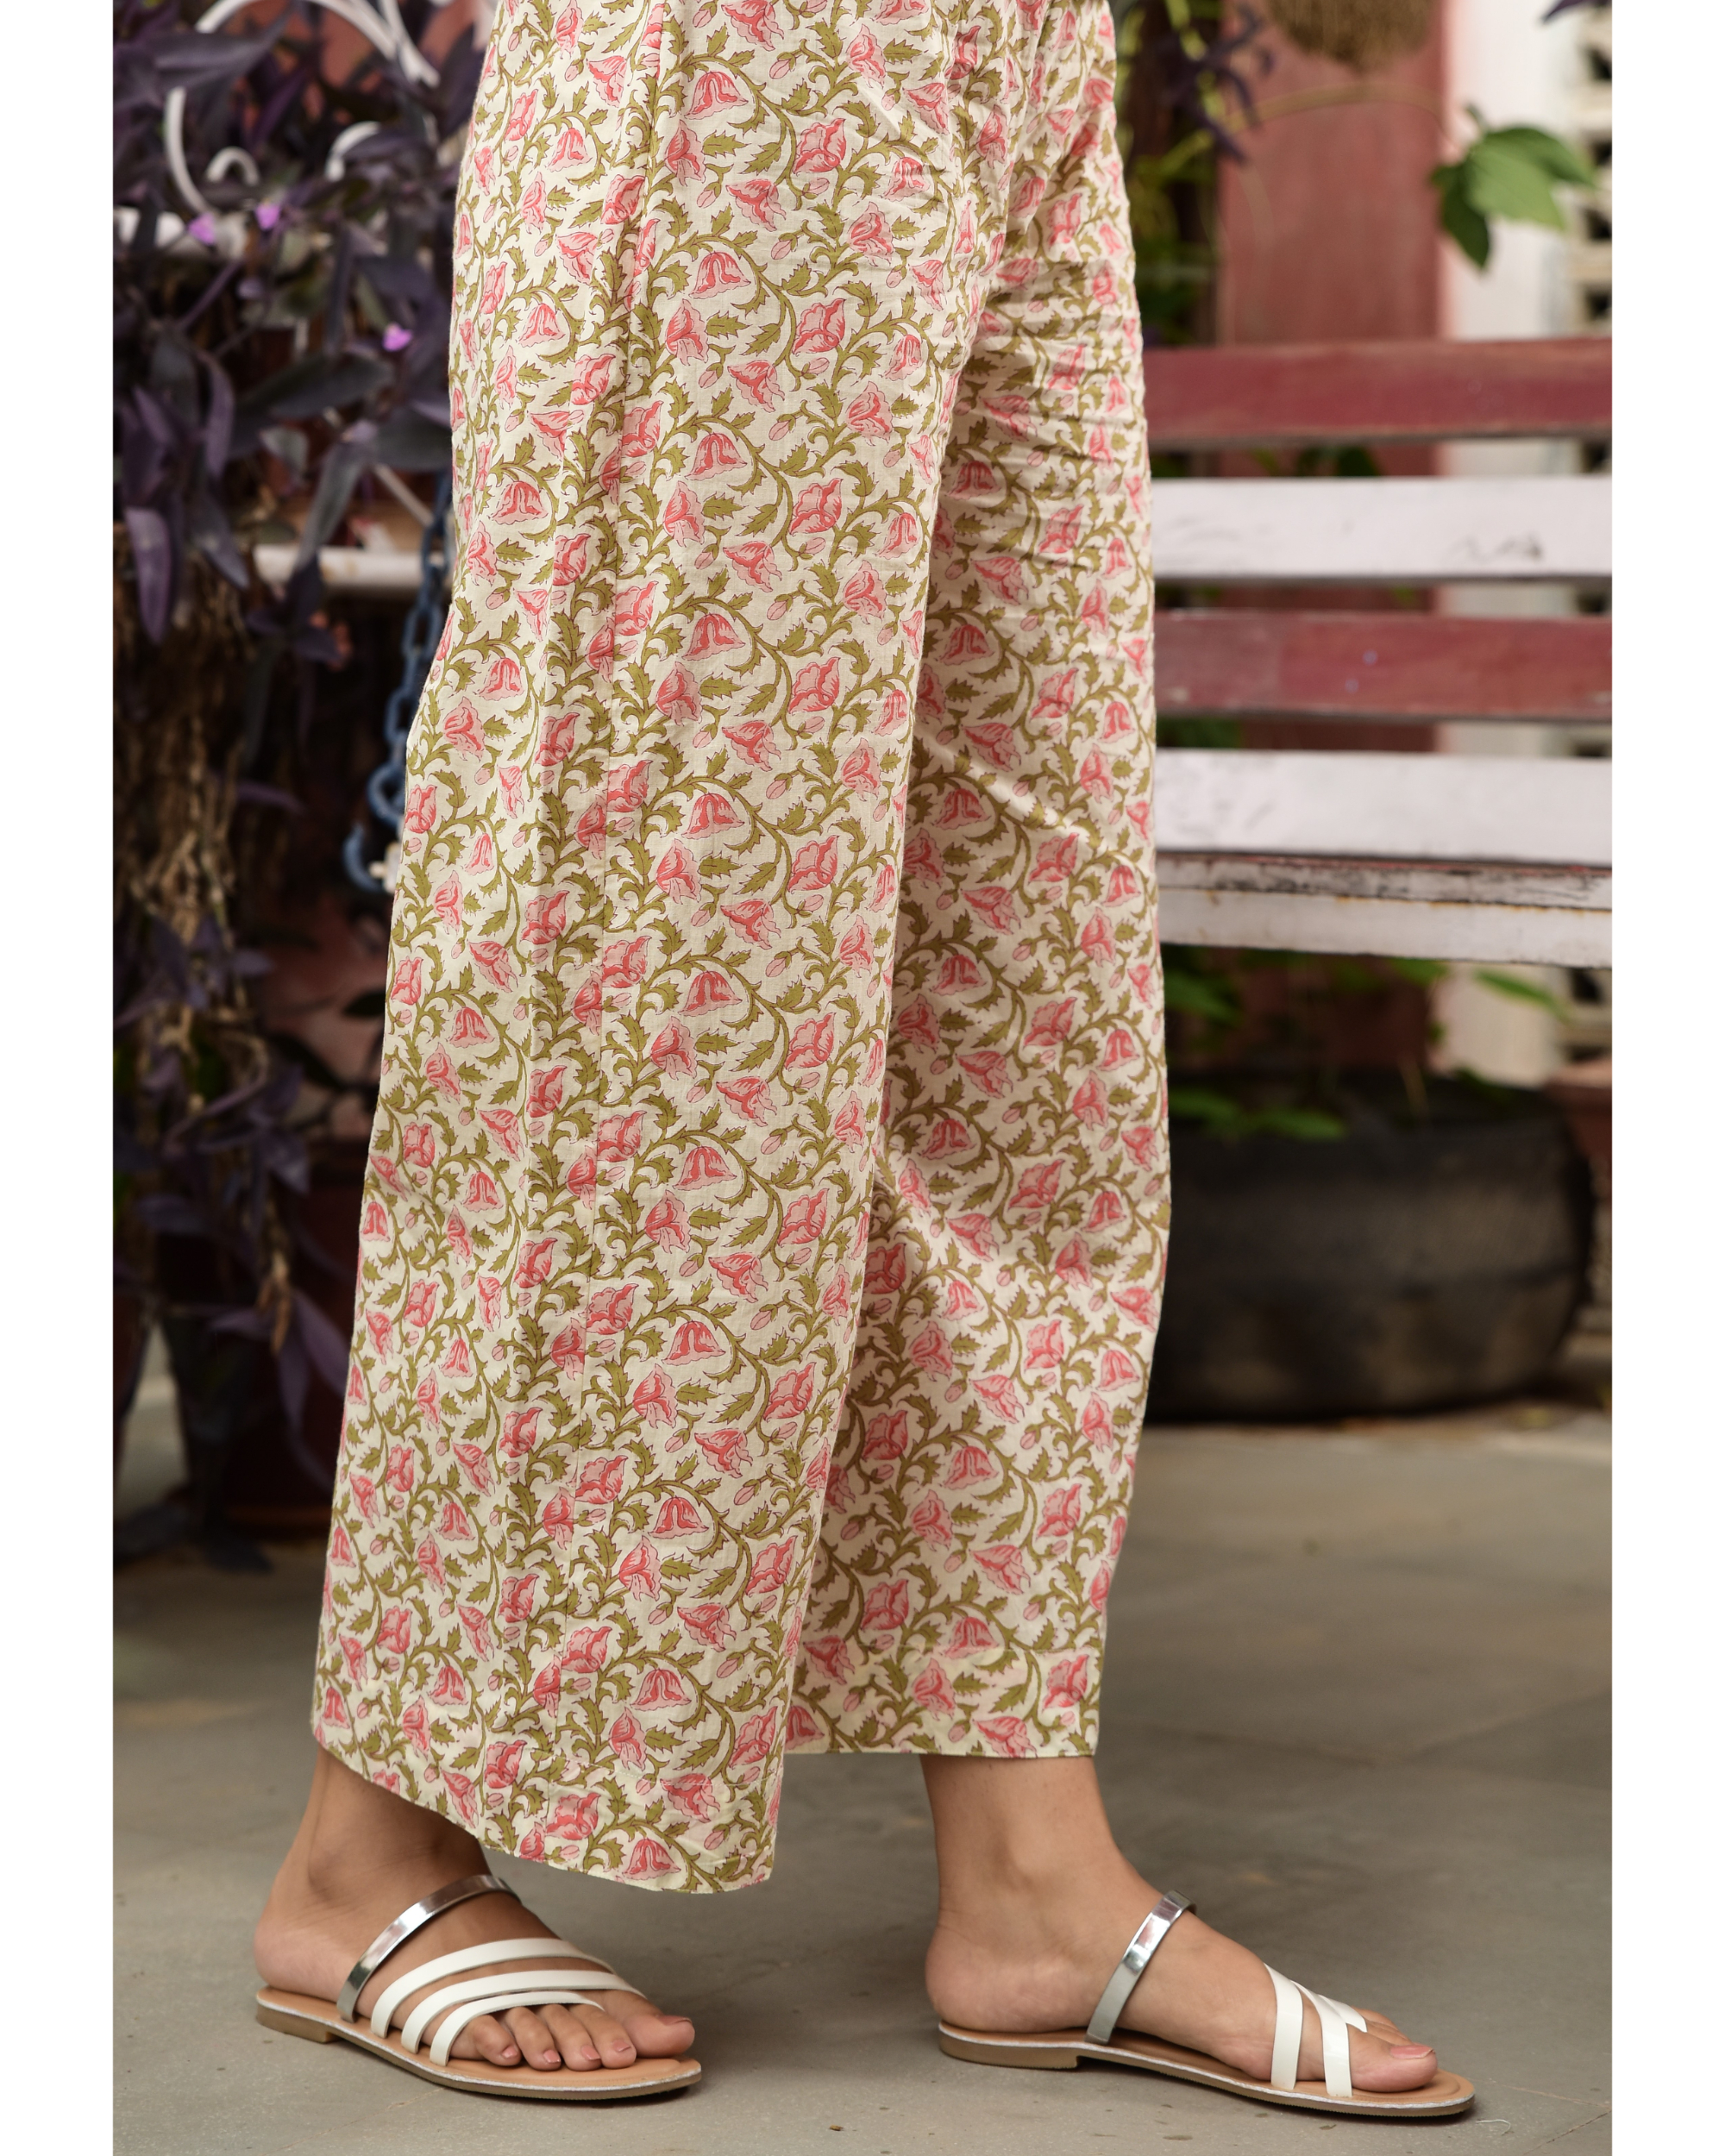 PRESHA Womens Flared Multicolor Palazzo Pant Jaipuri Cotton Printed Trouser  Free Size with Elastic  String for best fit